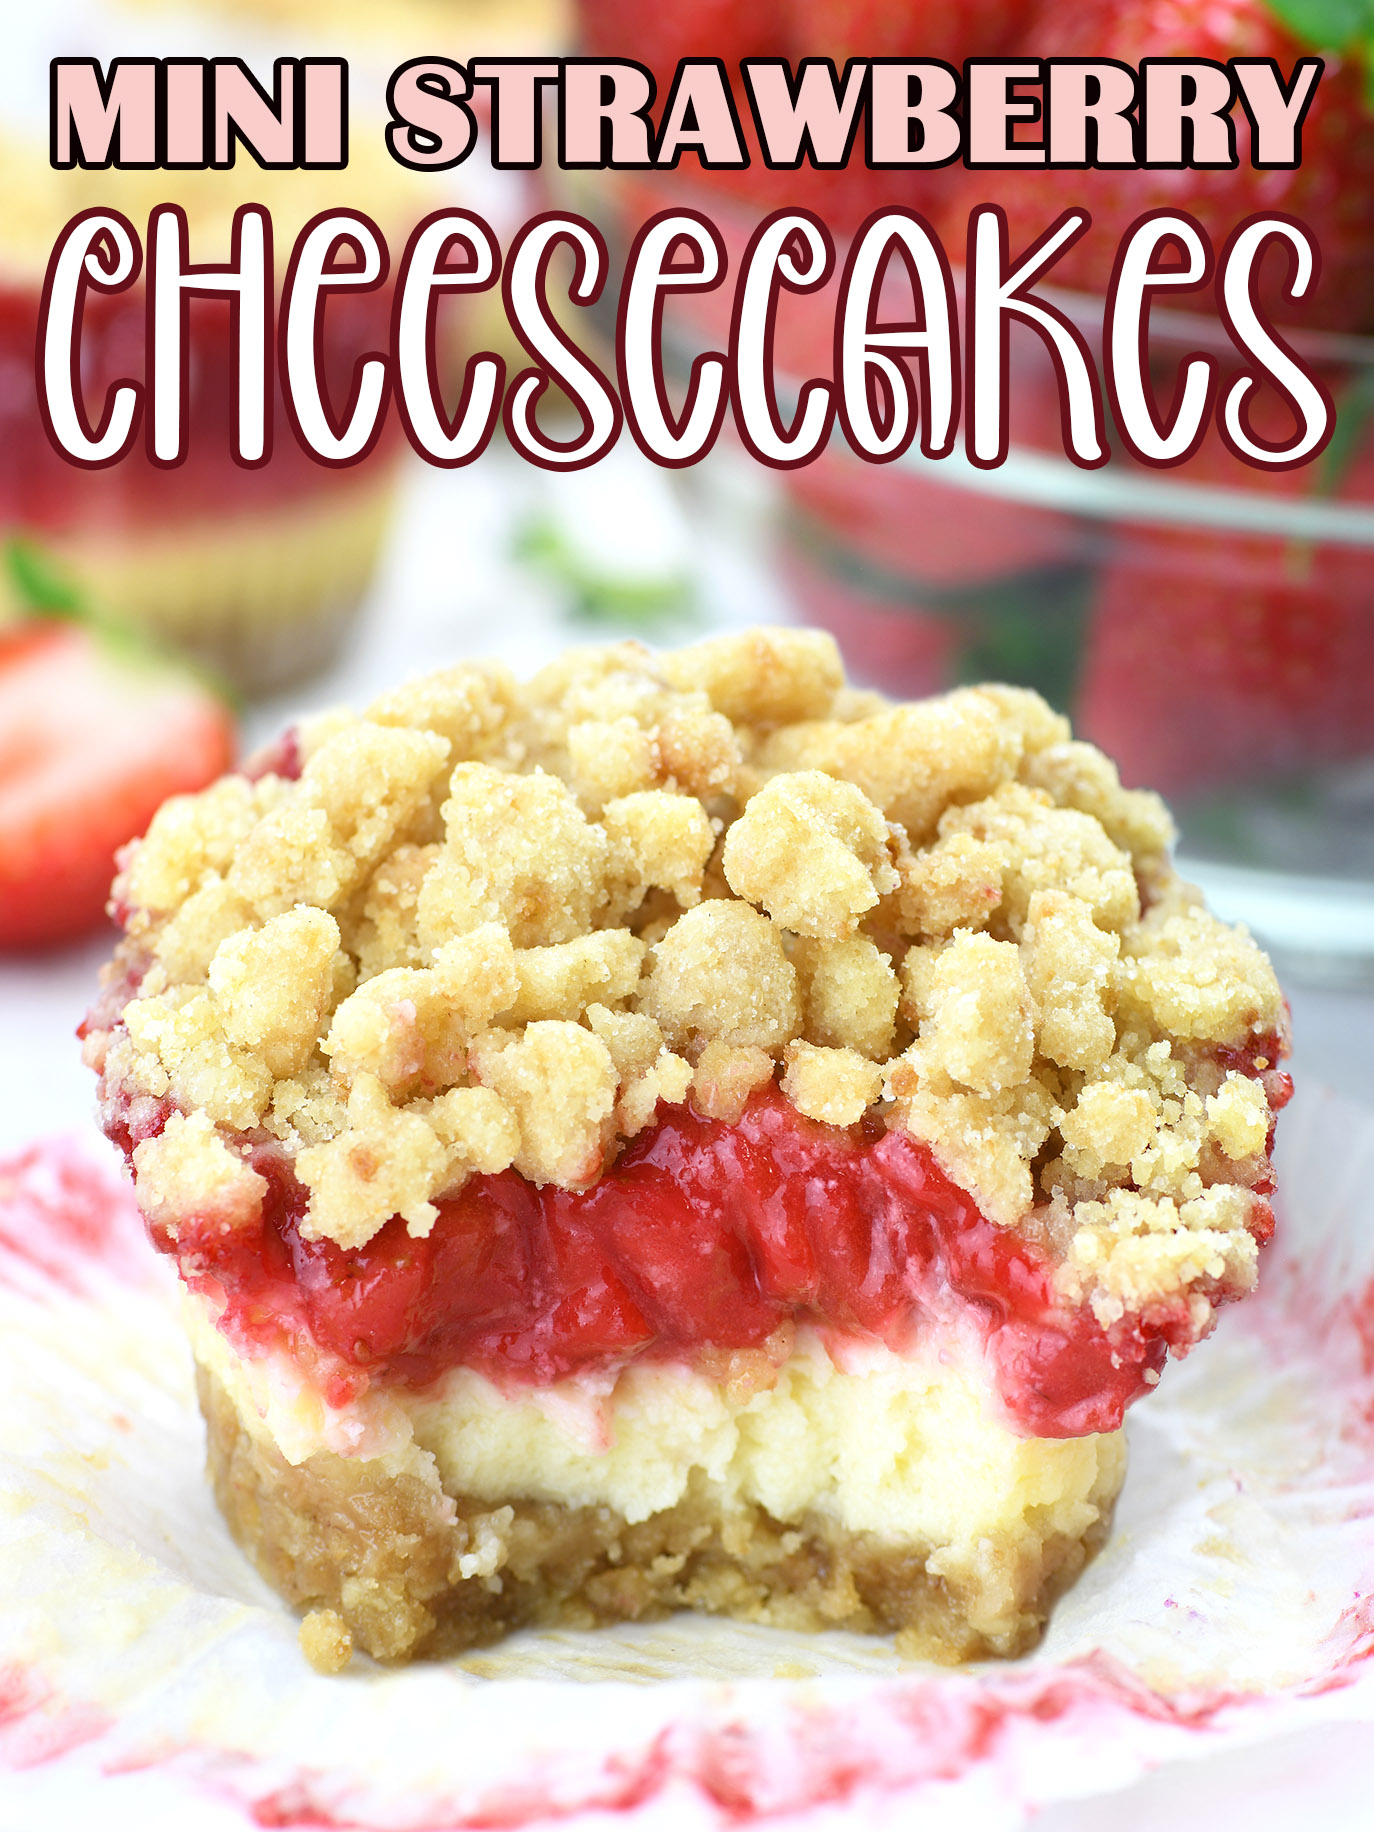 mini strawberry cheesecake with a crumble topping. It looks homemade and delicious, showcasing a cross-section of the dessert with distinct layers. The base appears to be a golden-brown crumb crust, topped with a layer of creamy cheesecake filling, followed by a vibrant red strawberry layer, and finished with a generous amount of golden crumble topping. The colors are quite rich, suggesting a ripe strawberry topping and a well-baked crust. It’s presented unwrapped from its baking liner, suggesting it’s ready to be enjoyed.